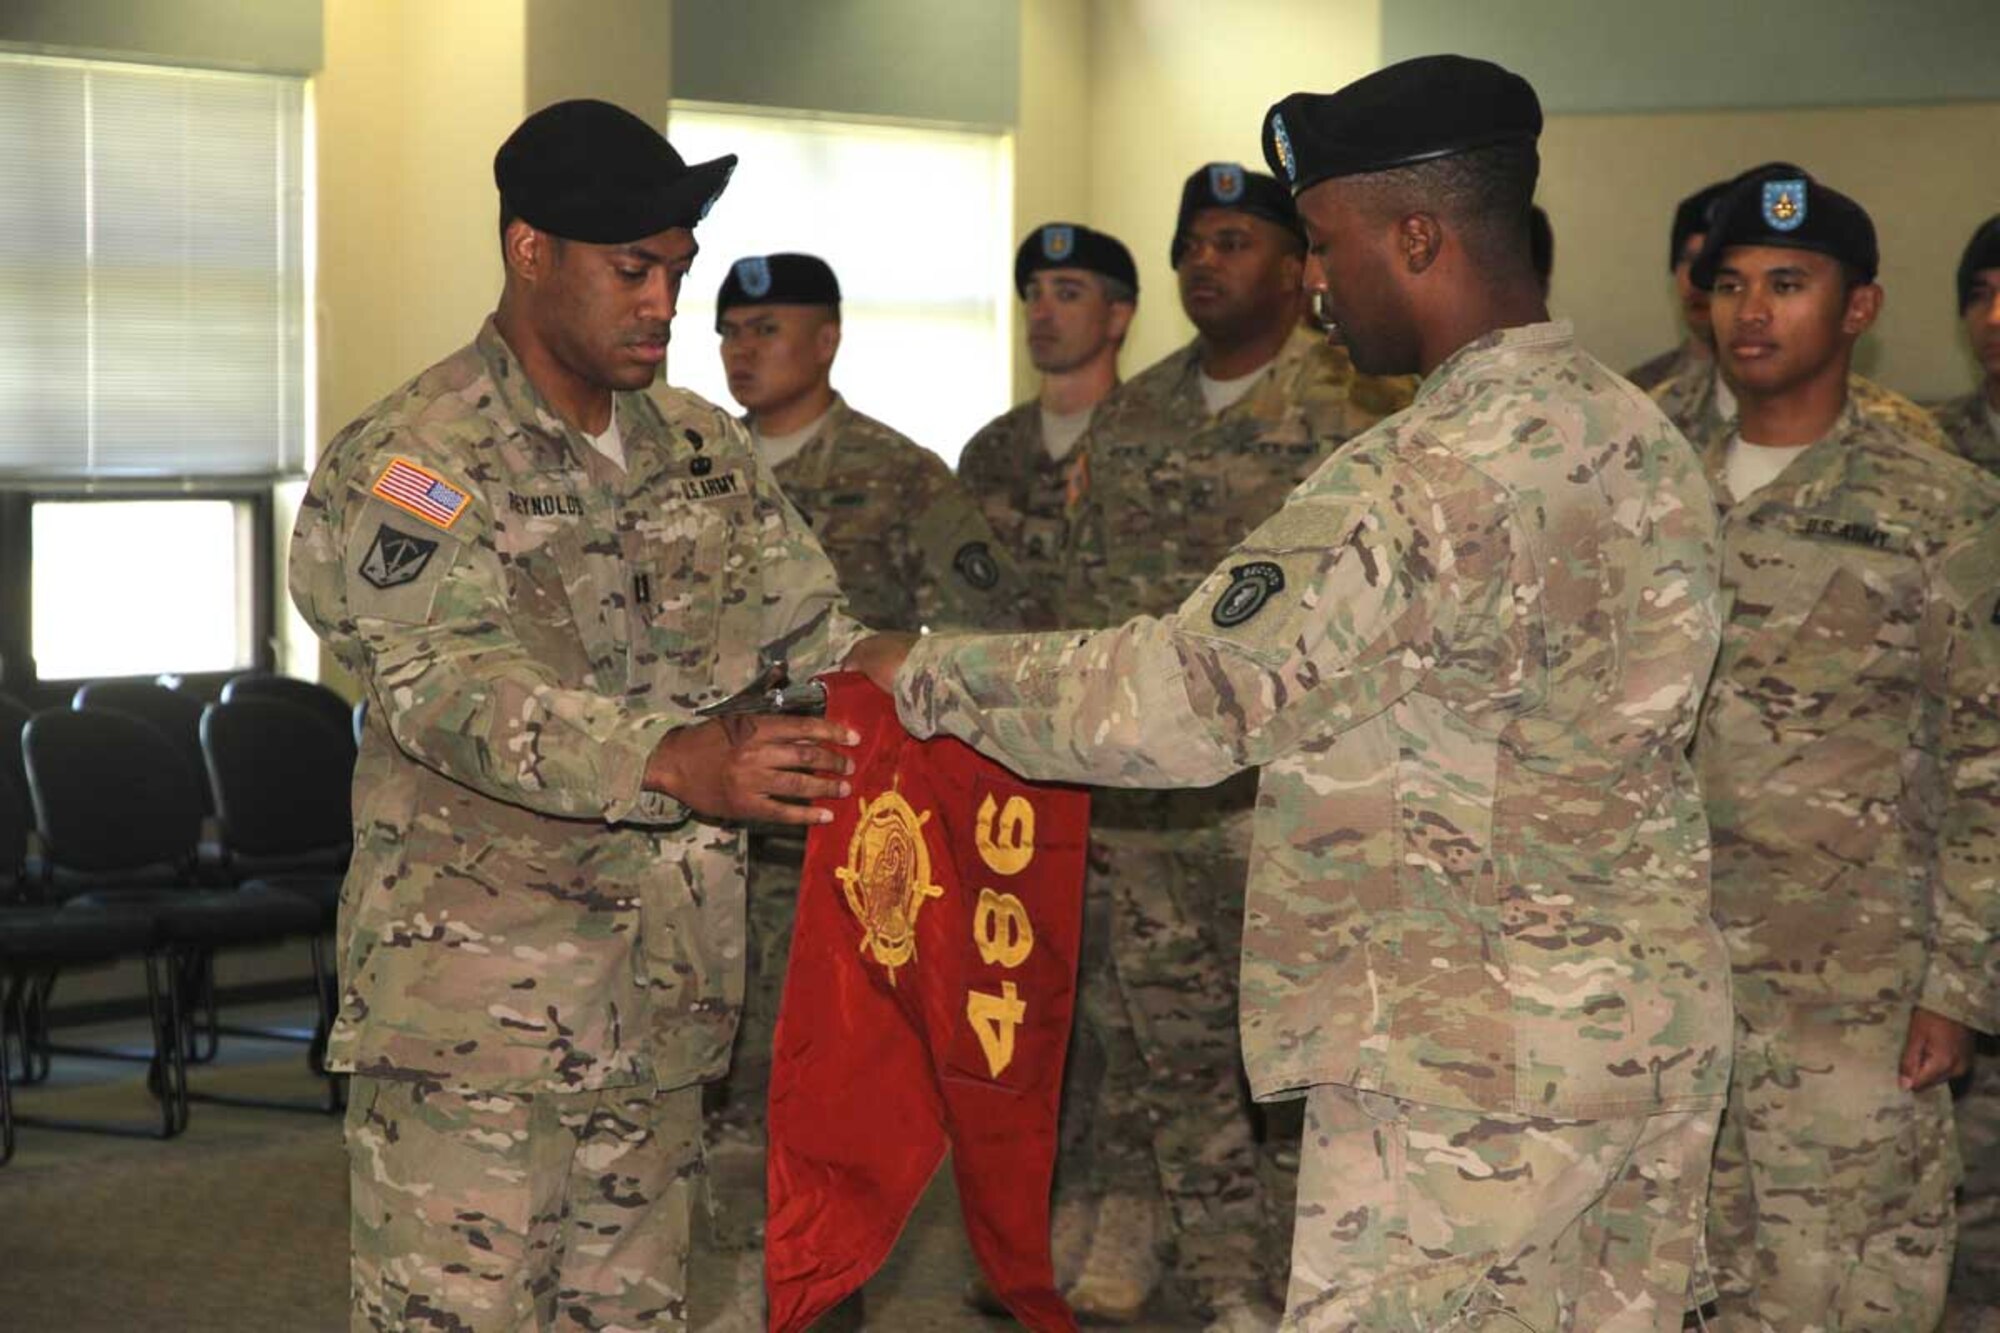 Army Capt.  Antonio Reynolds, 486th MCT company commander, and Sgt. 1st Class Tarik Smith, 486th MCT first sergeant, uncase the unit’s guidon during the MCT’s redeployment ceremony Tuesday at the Richardson Education Center.Soldiers of the MCT redeployed from a yearlong mission throughout Kuwait and Afghanistan. The uncasing of the guidon signified the unit’s successful completion of a combat deployment and subsequent reintegration into U.S. Army Alaska.  (U.S. Army photo/Sgt. Tamika Dillard)
